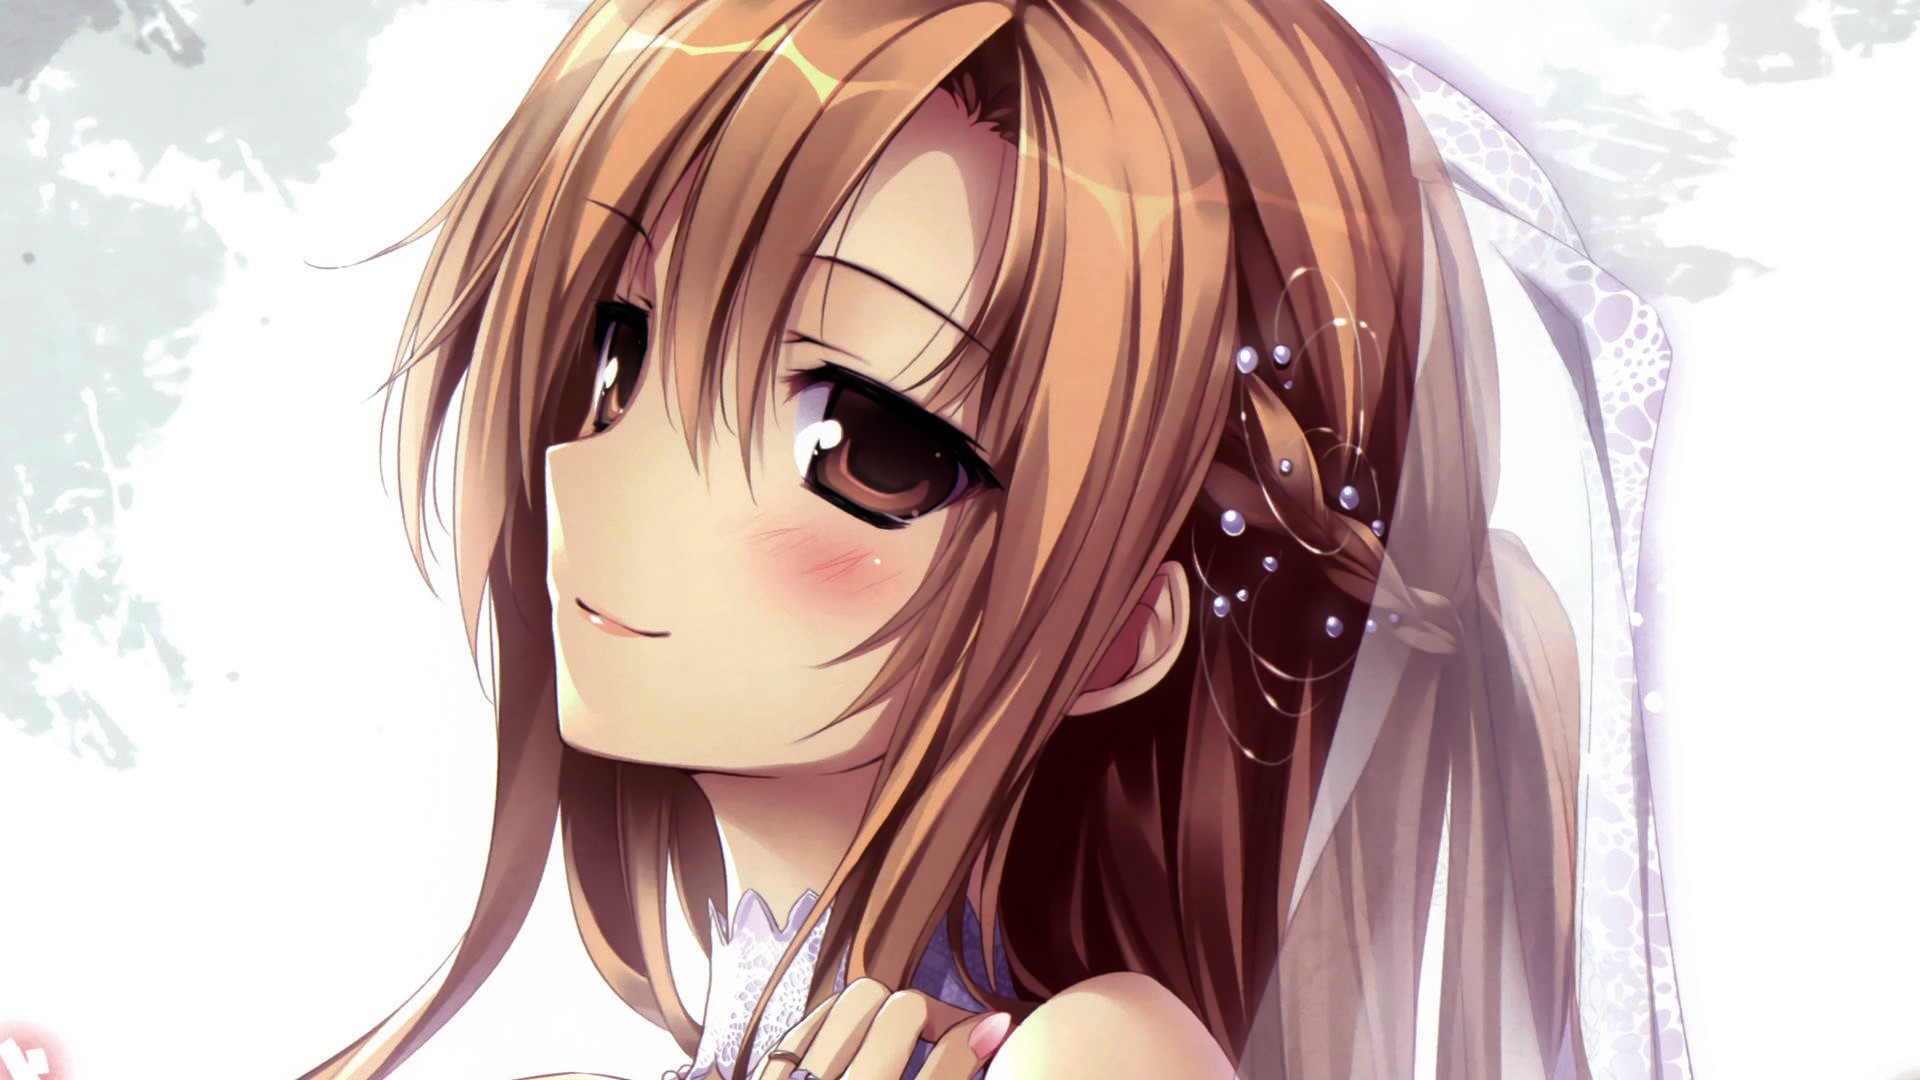 Anime girl Yuuki Asuna in a wedding veil wallpapers and images